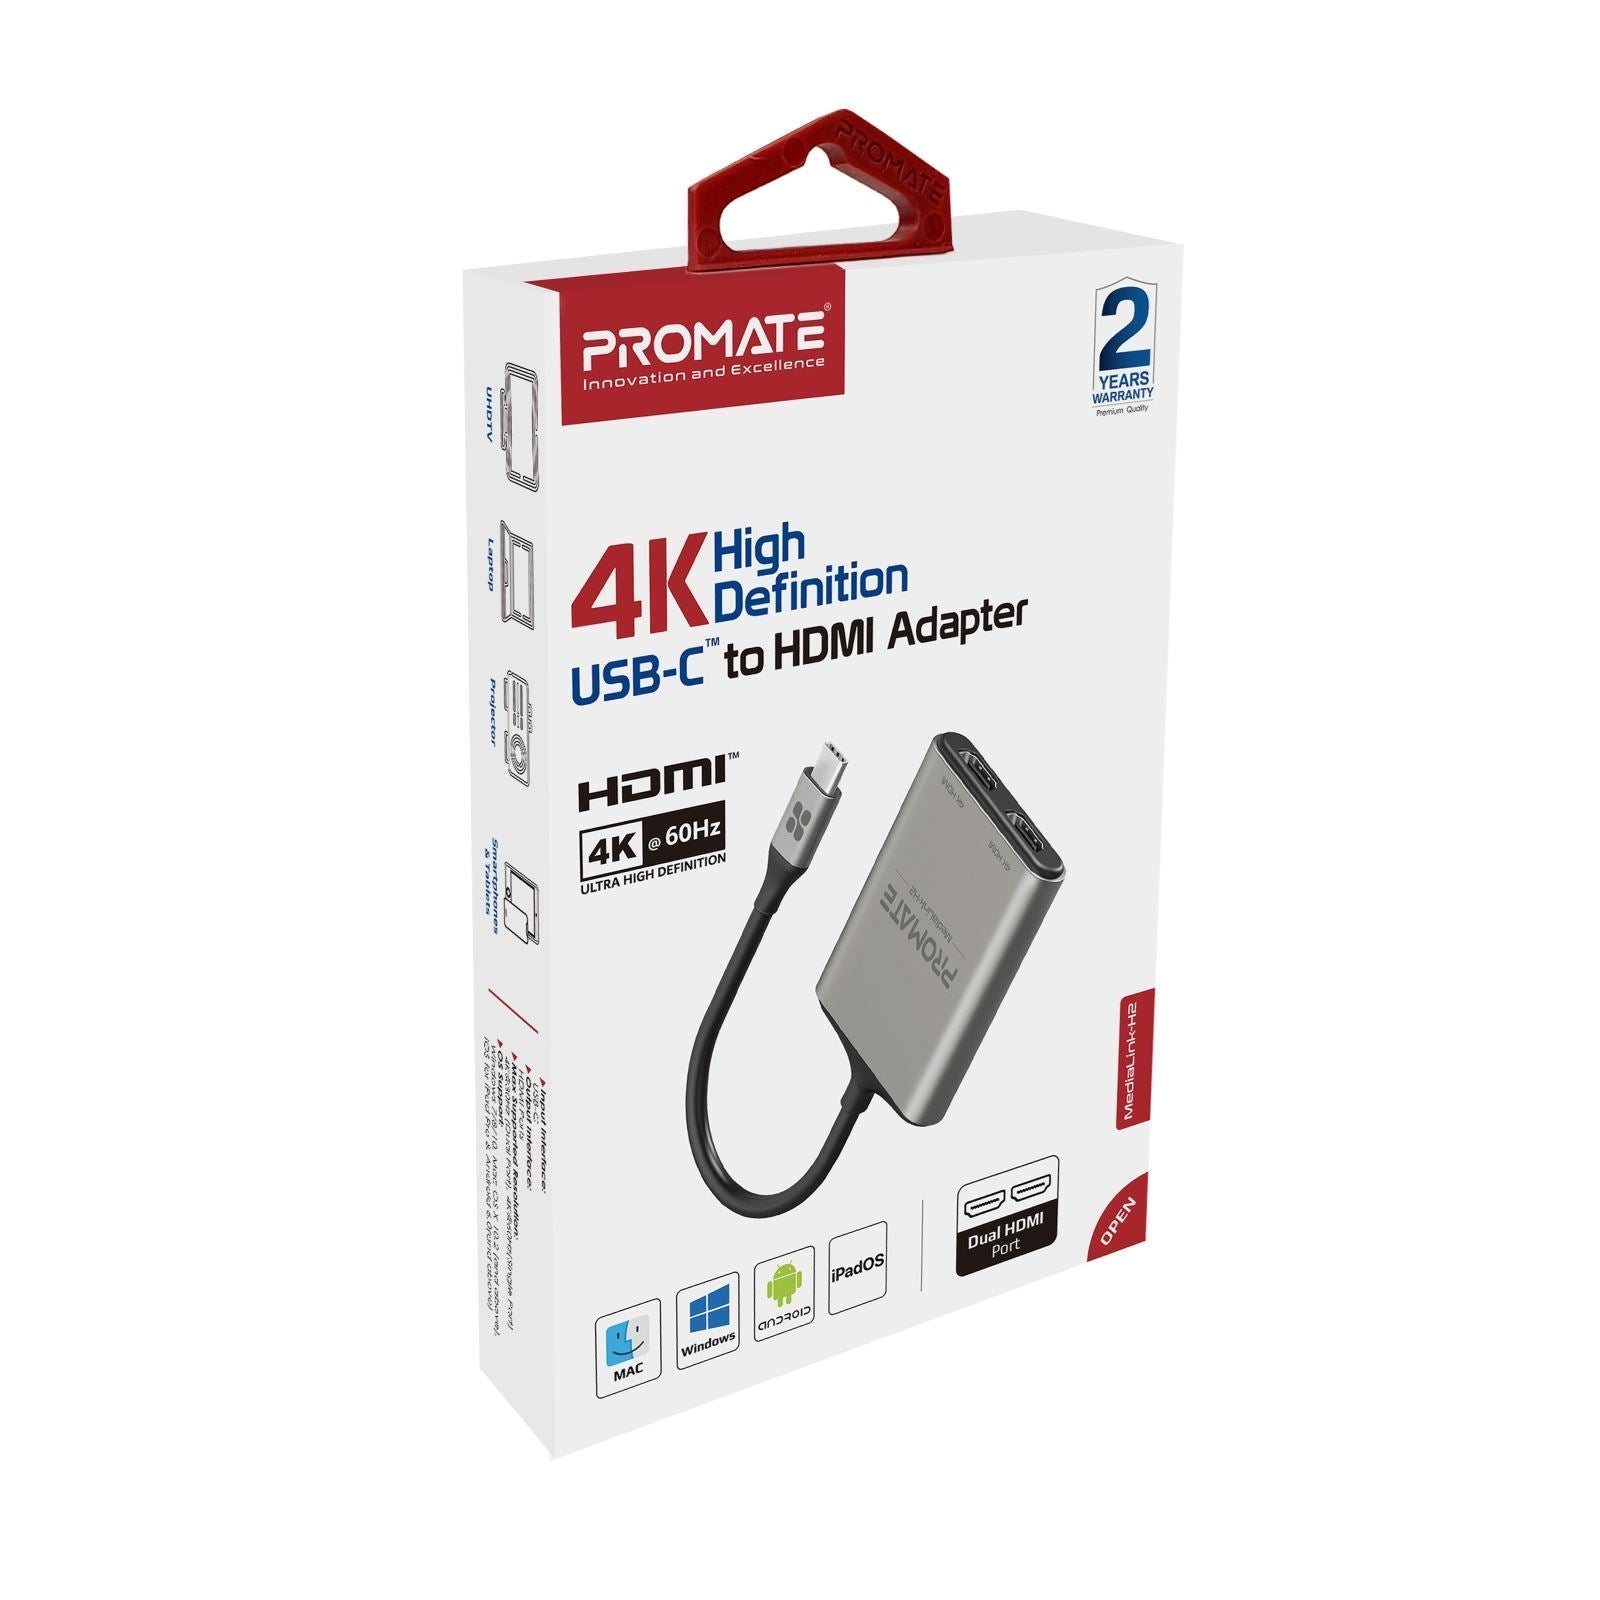 PROMATE_4K_USB-C_Connector_to_Dual_HDMI_Adapter._Compatible_with_All_USB-C_Output_Devices_Including_Win,_iOS,_&_Android._Easy_Plug_&_Play._Grey 1506